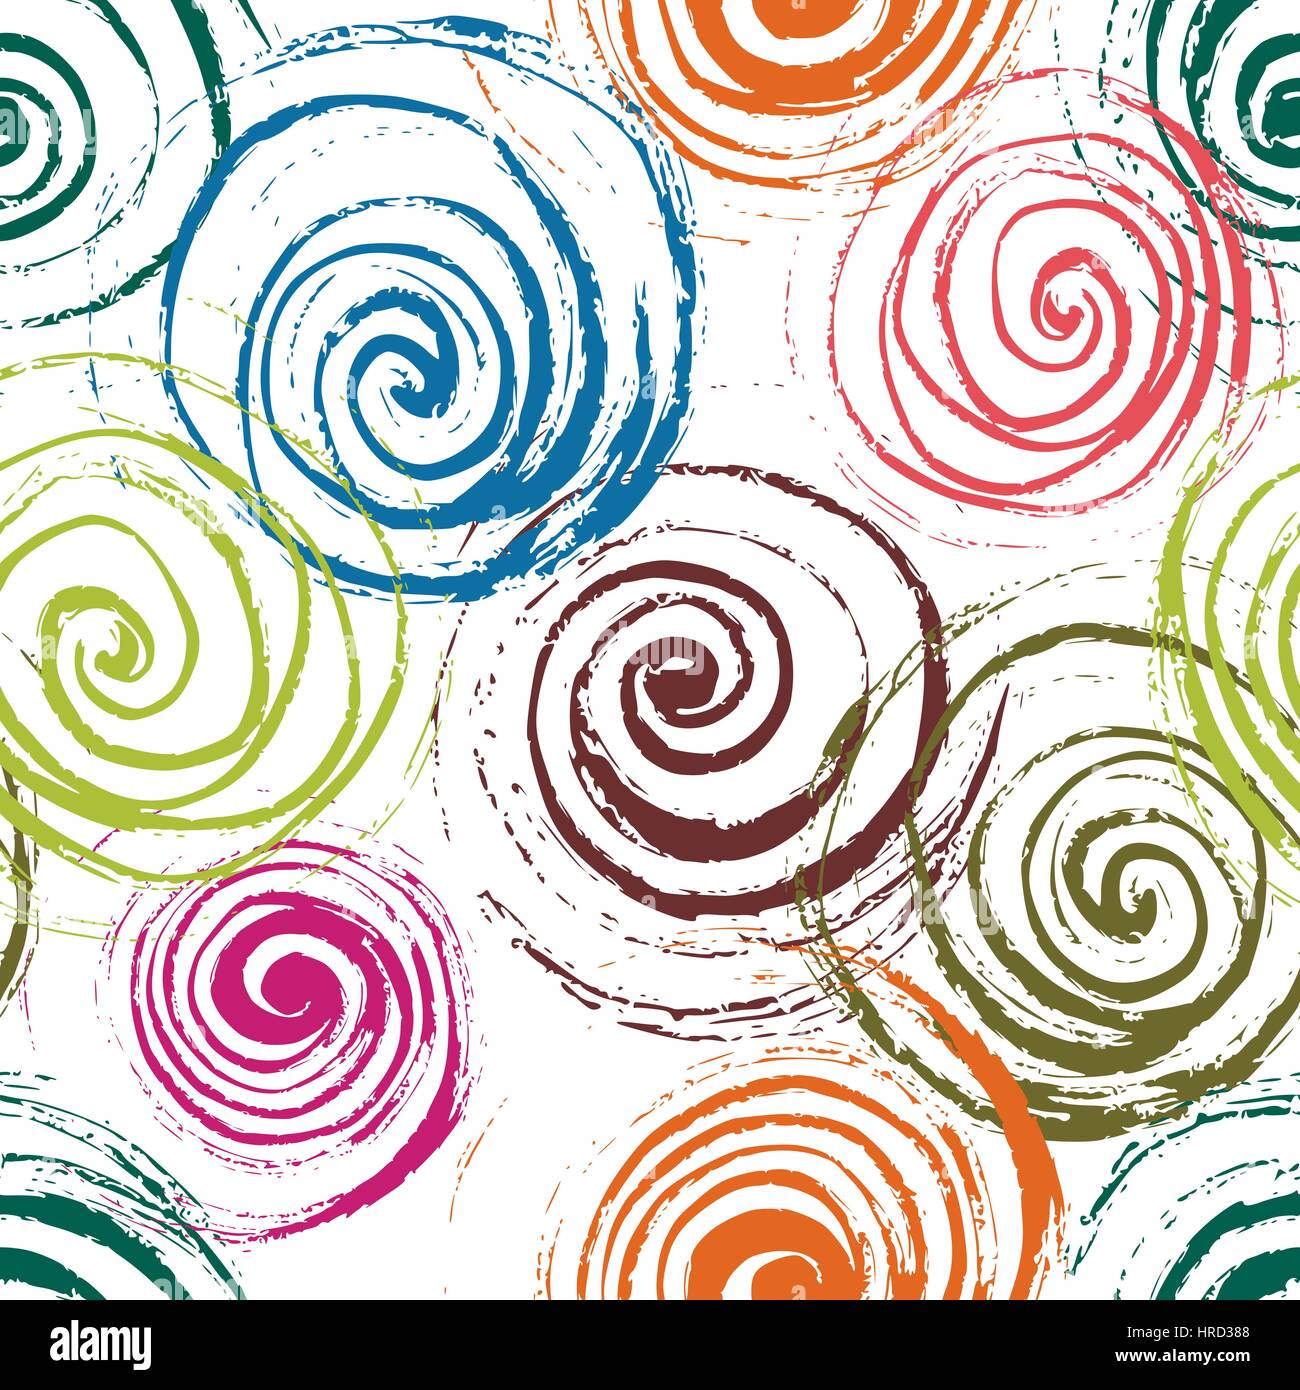 Swirl seamless pattern. Hand drawn spirals, free layout. Colors of flowers on white background. Textile design. Stock Vector